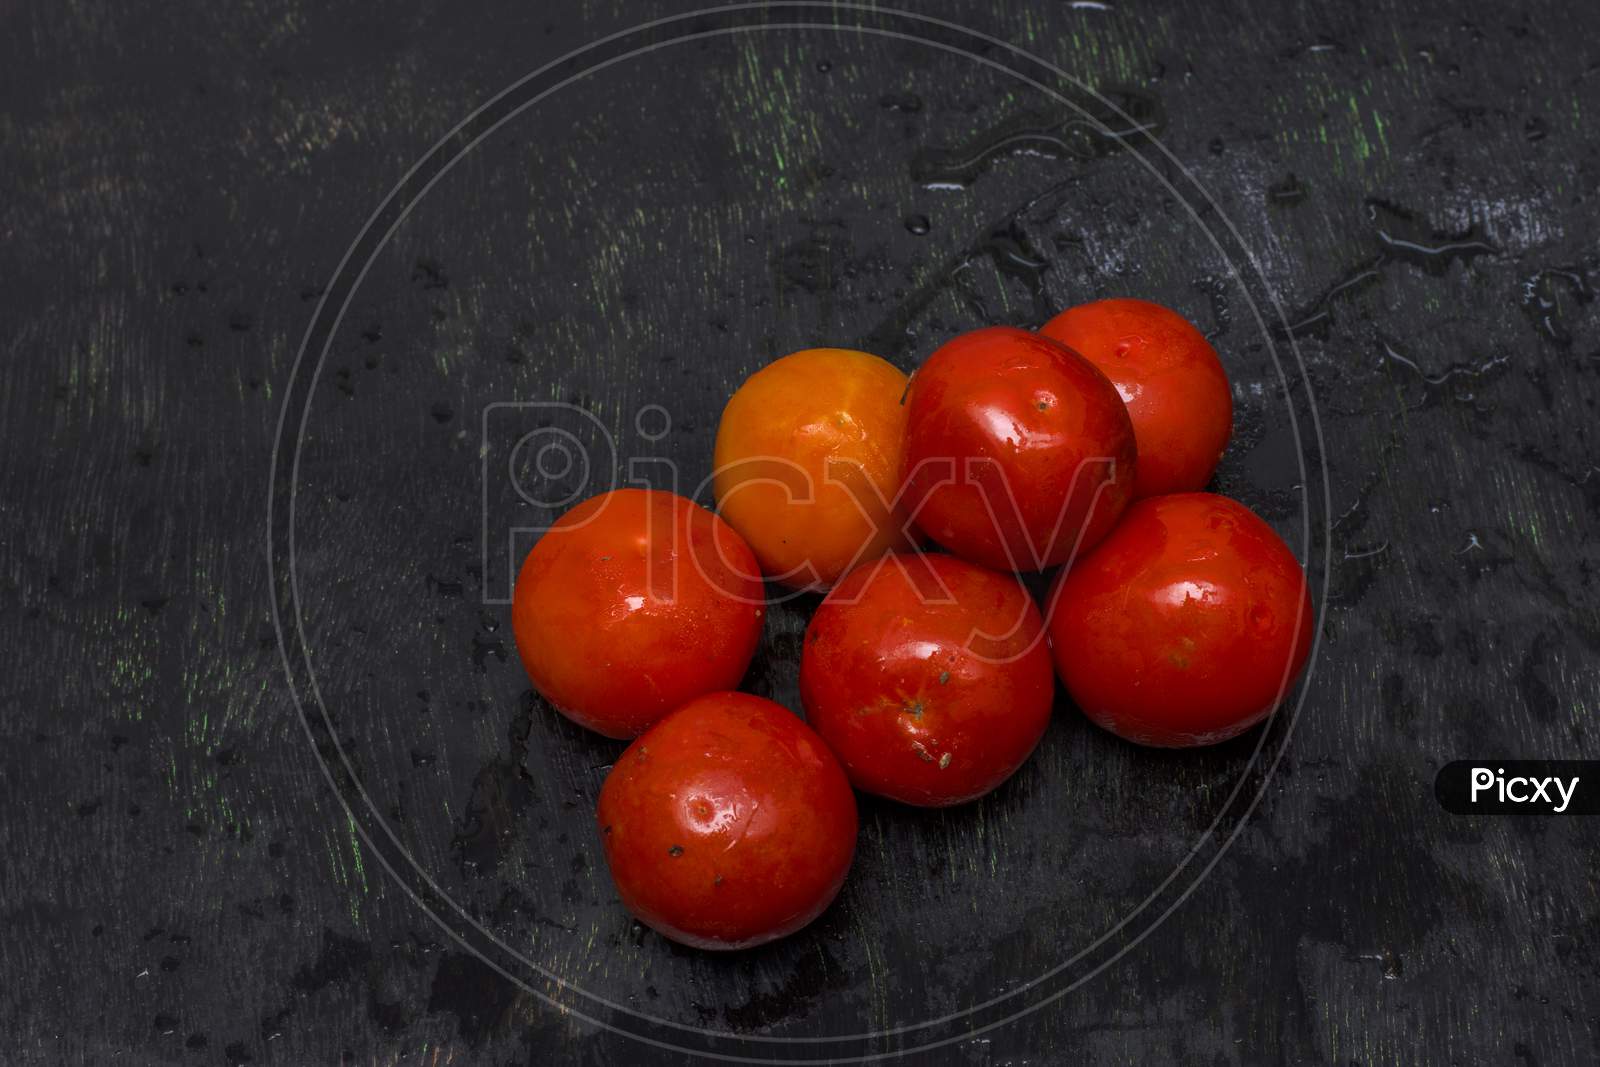 Few Fresh Organic Tomatoes On A Black Background With Selective Focus